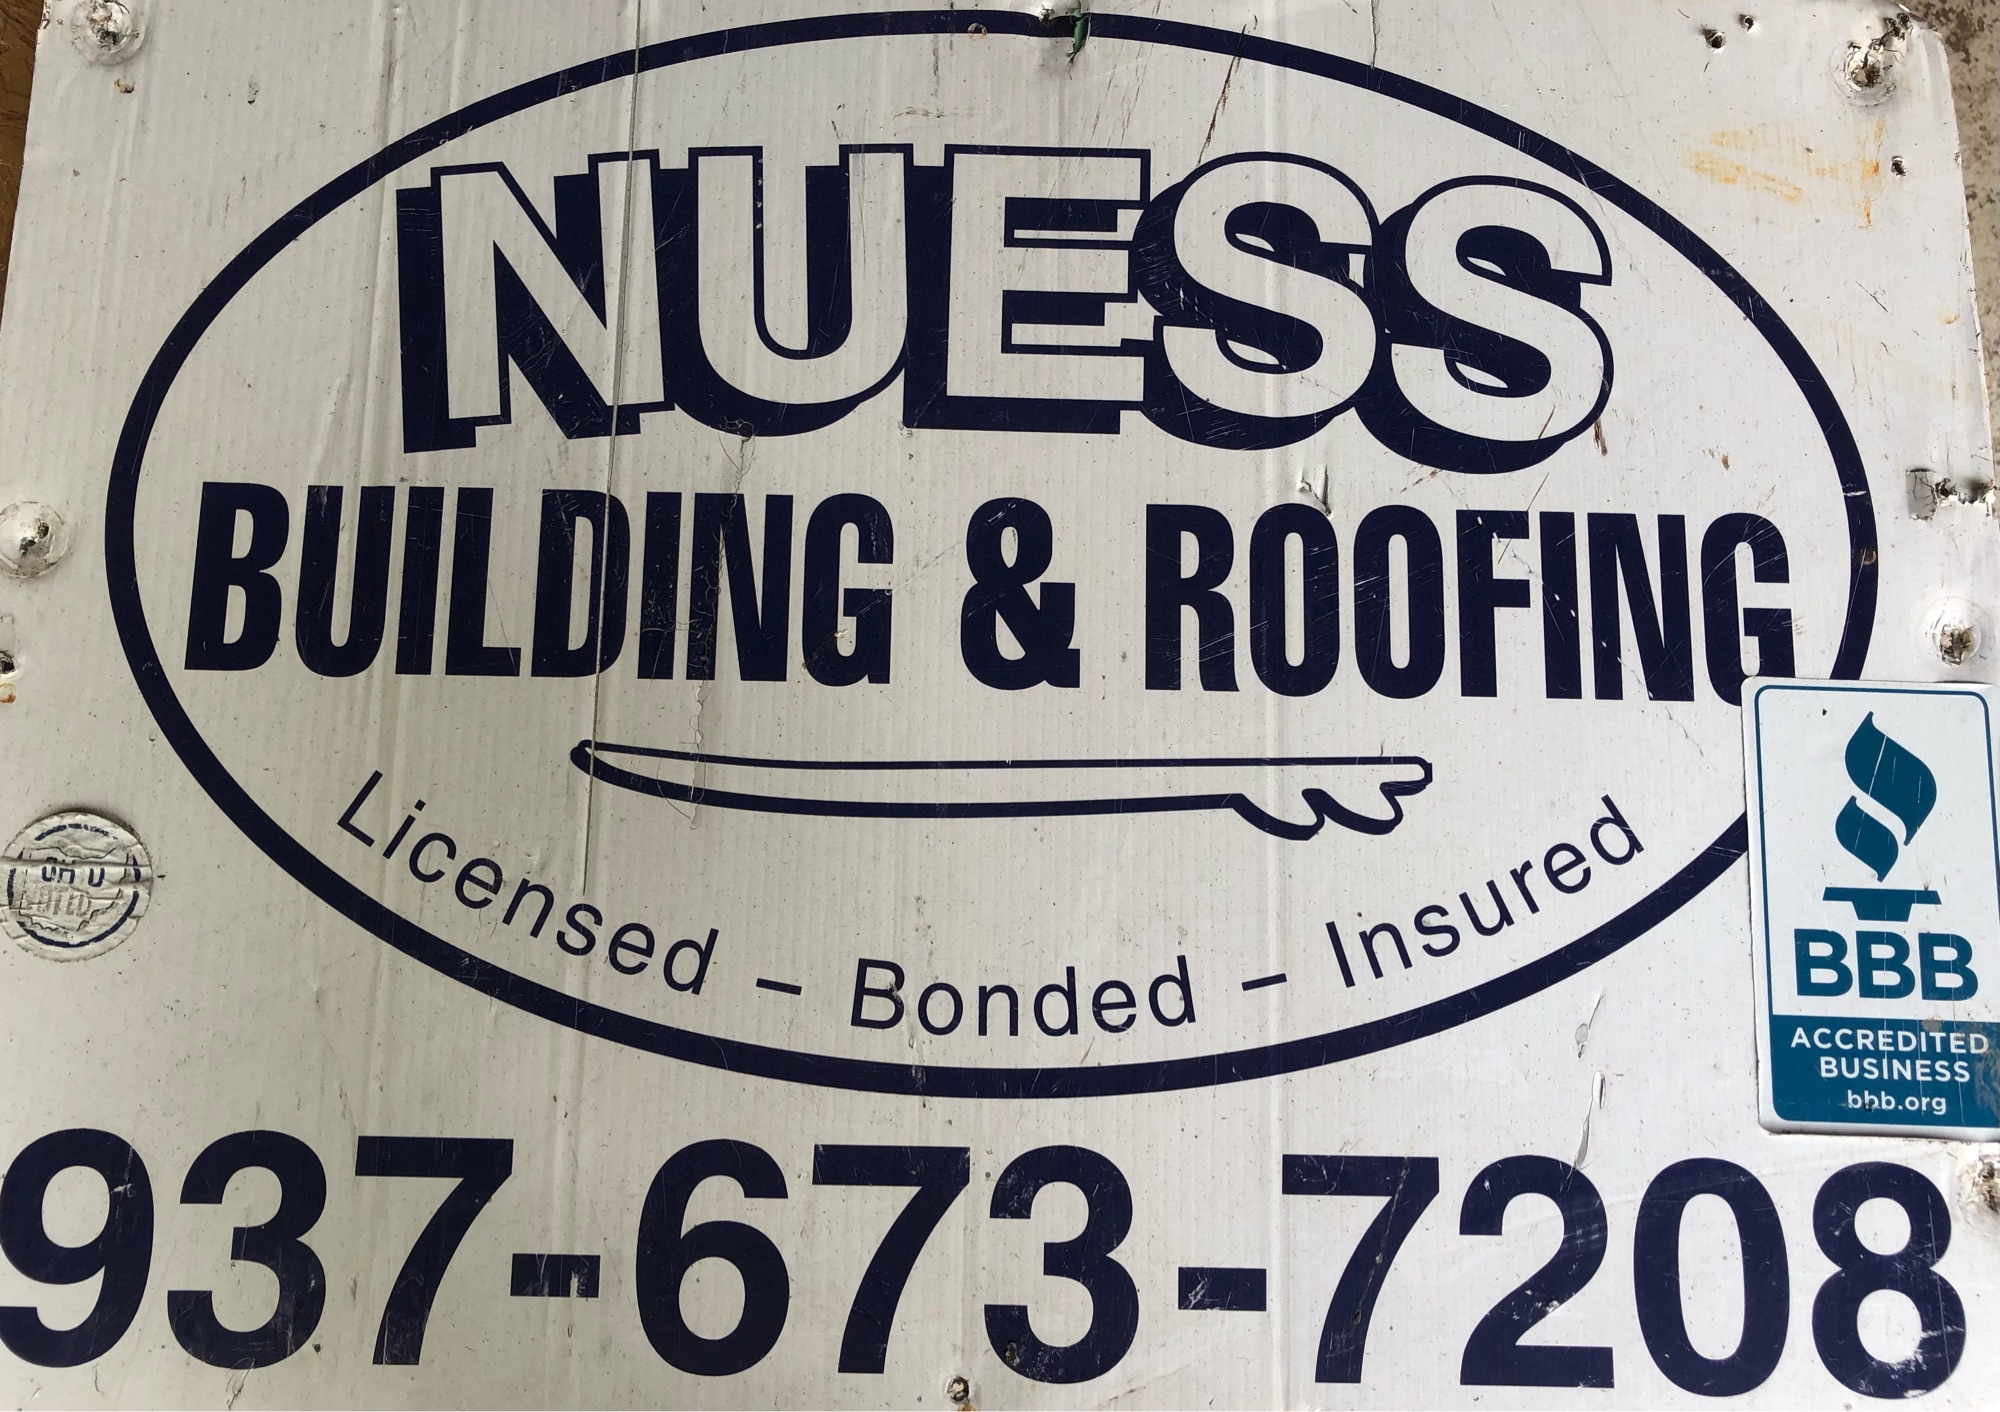 Richard Nuess Building and Roofing Contractor, Inc. Logo